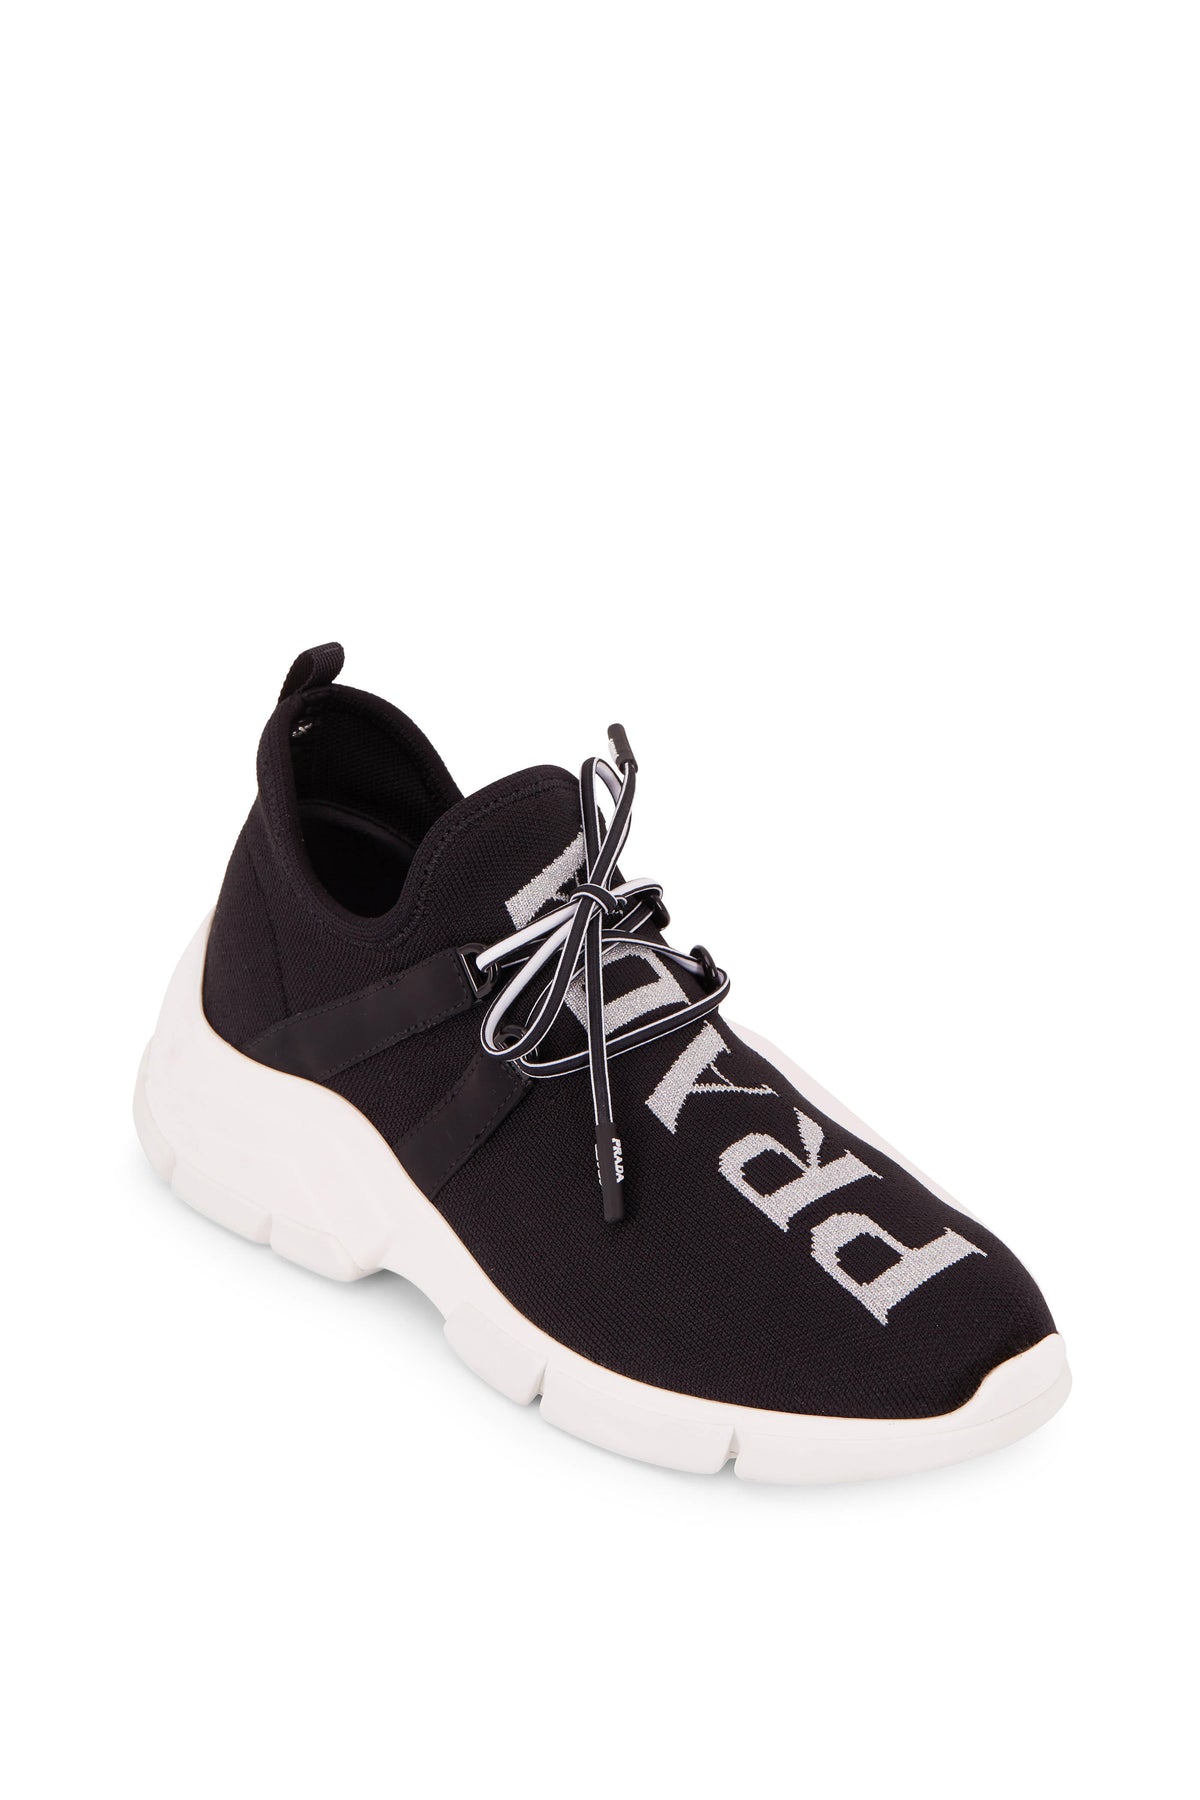 Fashion Steals: Discount on Prada Sneakers